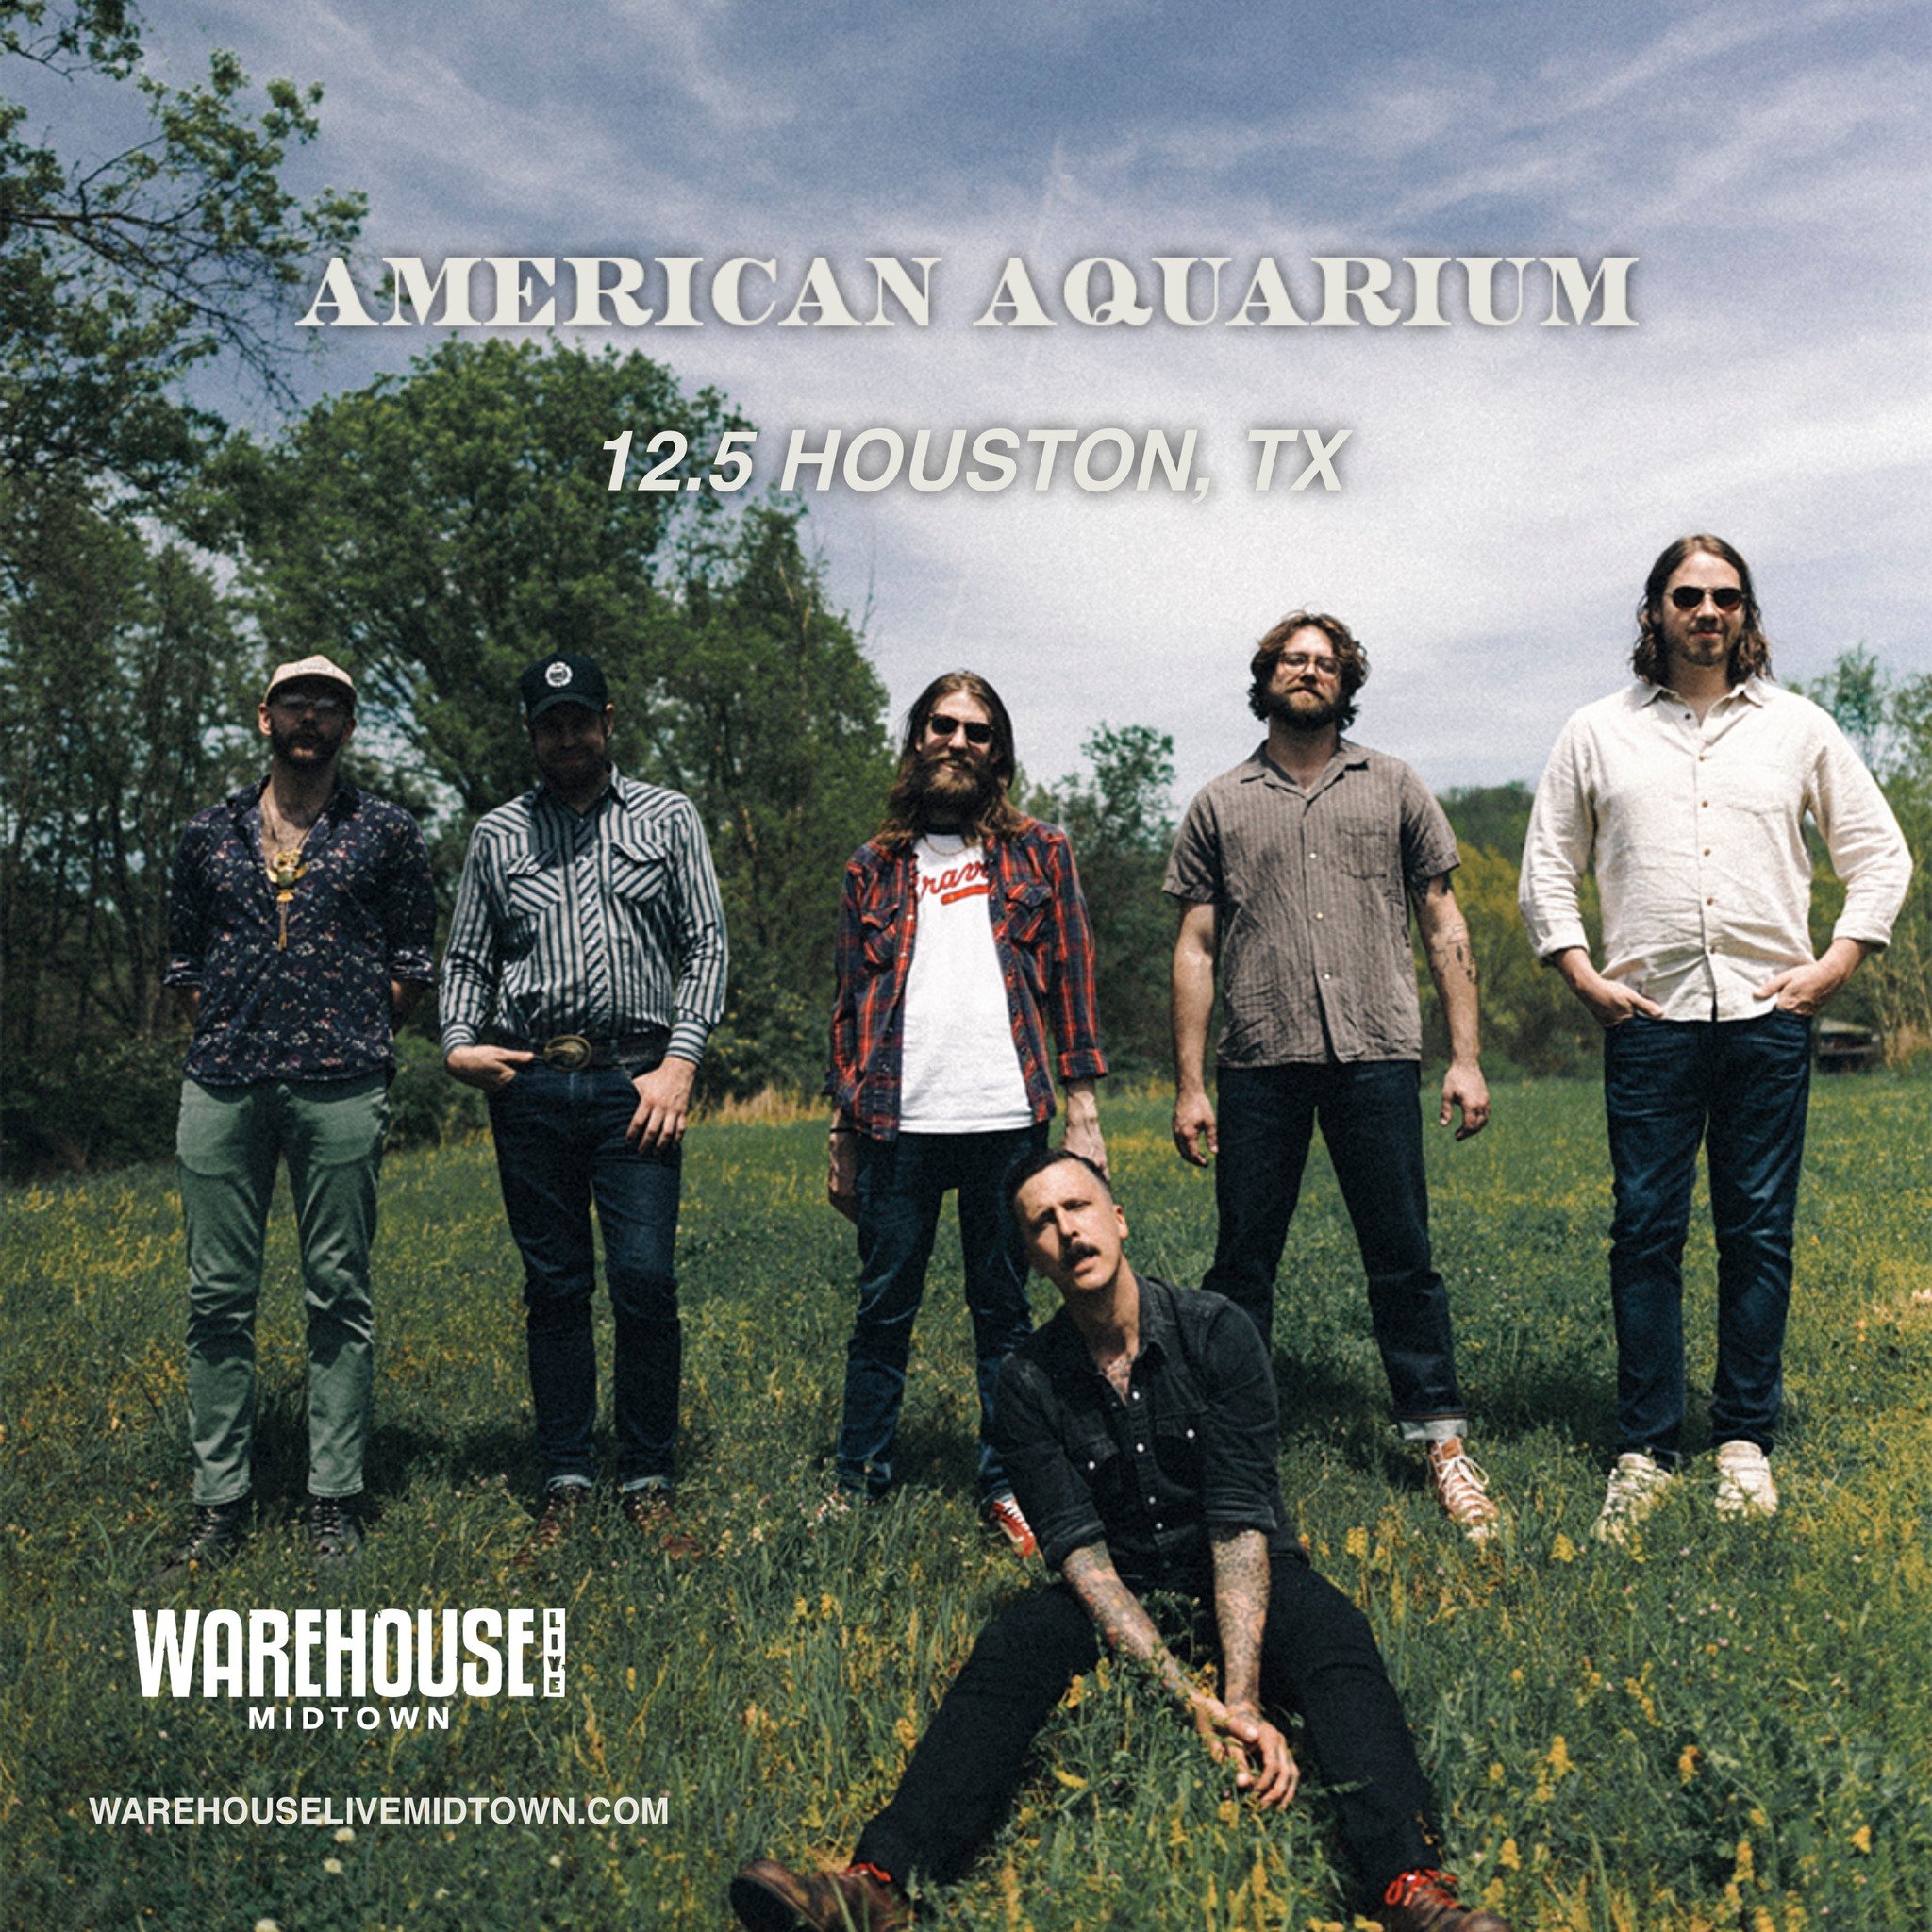 🤠 Now Announcing @americanaquarium comes to Houston Thursday December 5th.  Tickets go on sale Friday May 3rd at 9am CT. For more information go to warehouselivemidtown.com
.
.
#americanaquarium #country #warehouselive #warehouselivemidtown